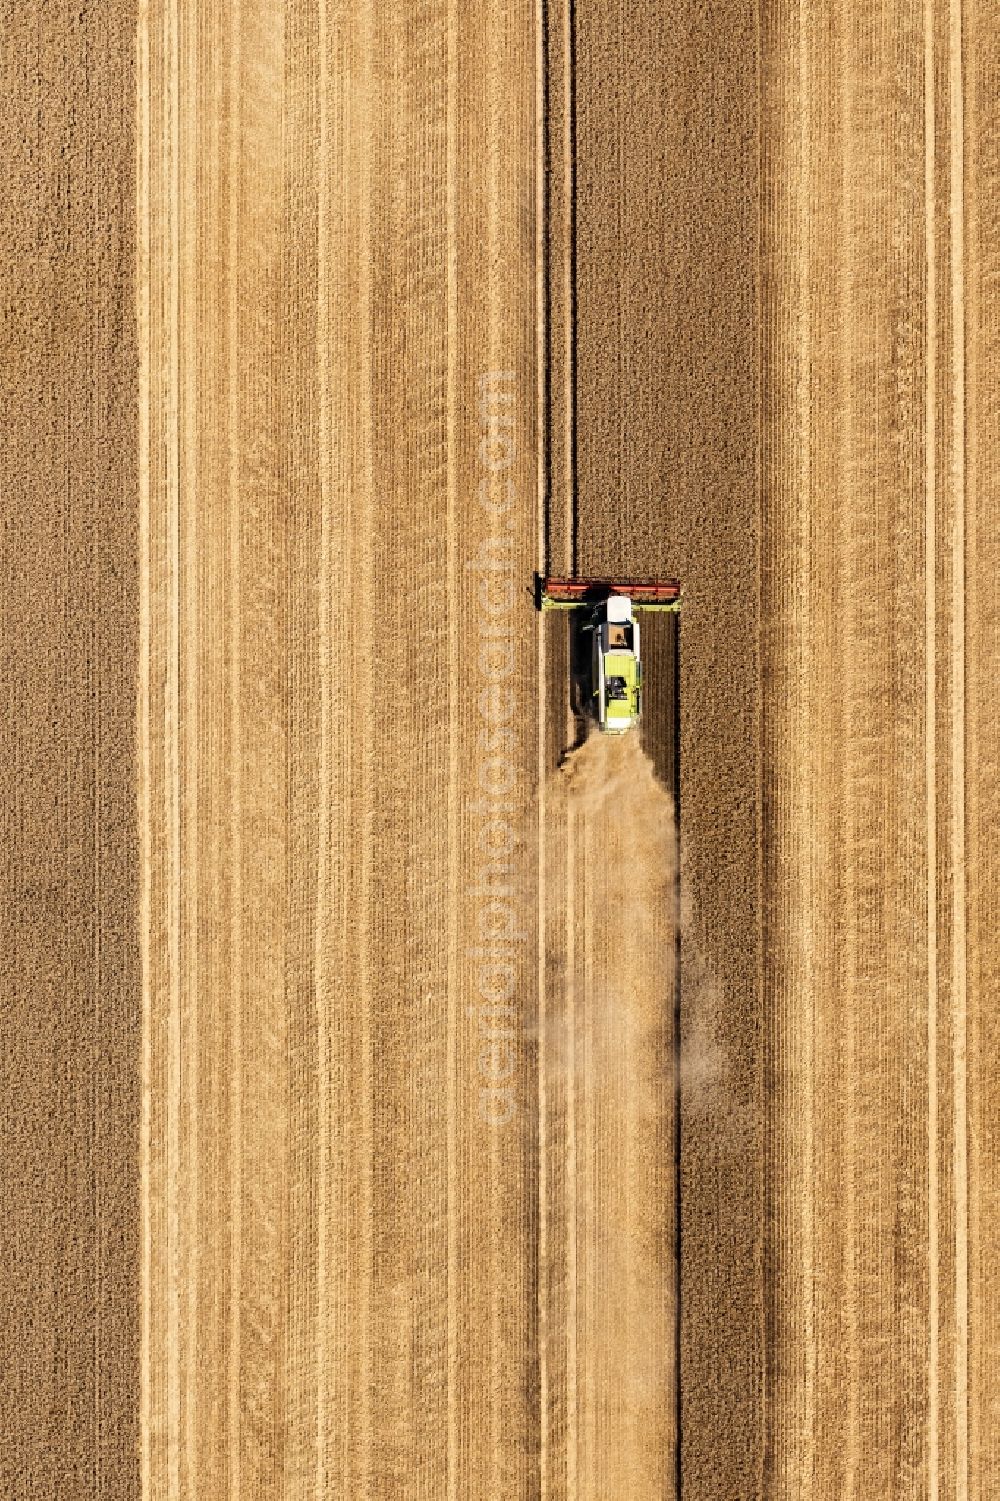 Vertical aerial photograph Bad Düben - Vertical aerial view from the satellite perspective of the harvest use of heavy agricultural machinery - combine harvesters and harvesting vehicles on agricultural fields in Bad Dueben in the state Saxony, Germany